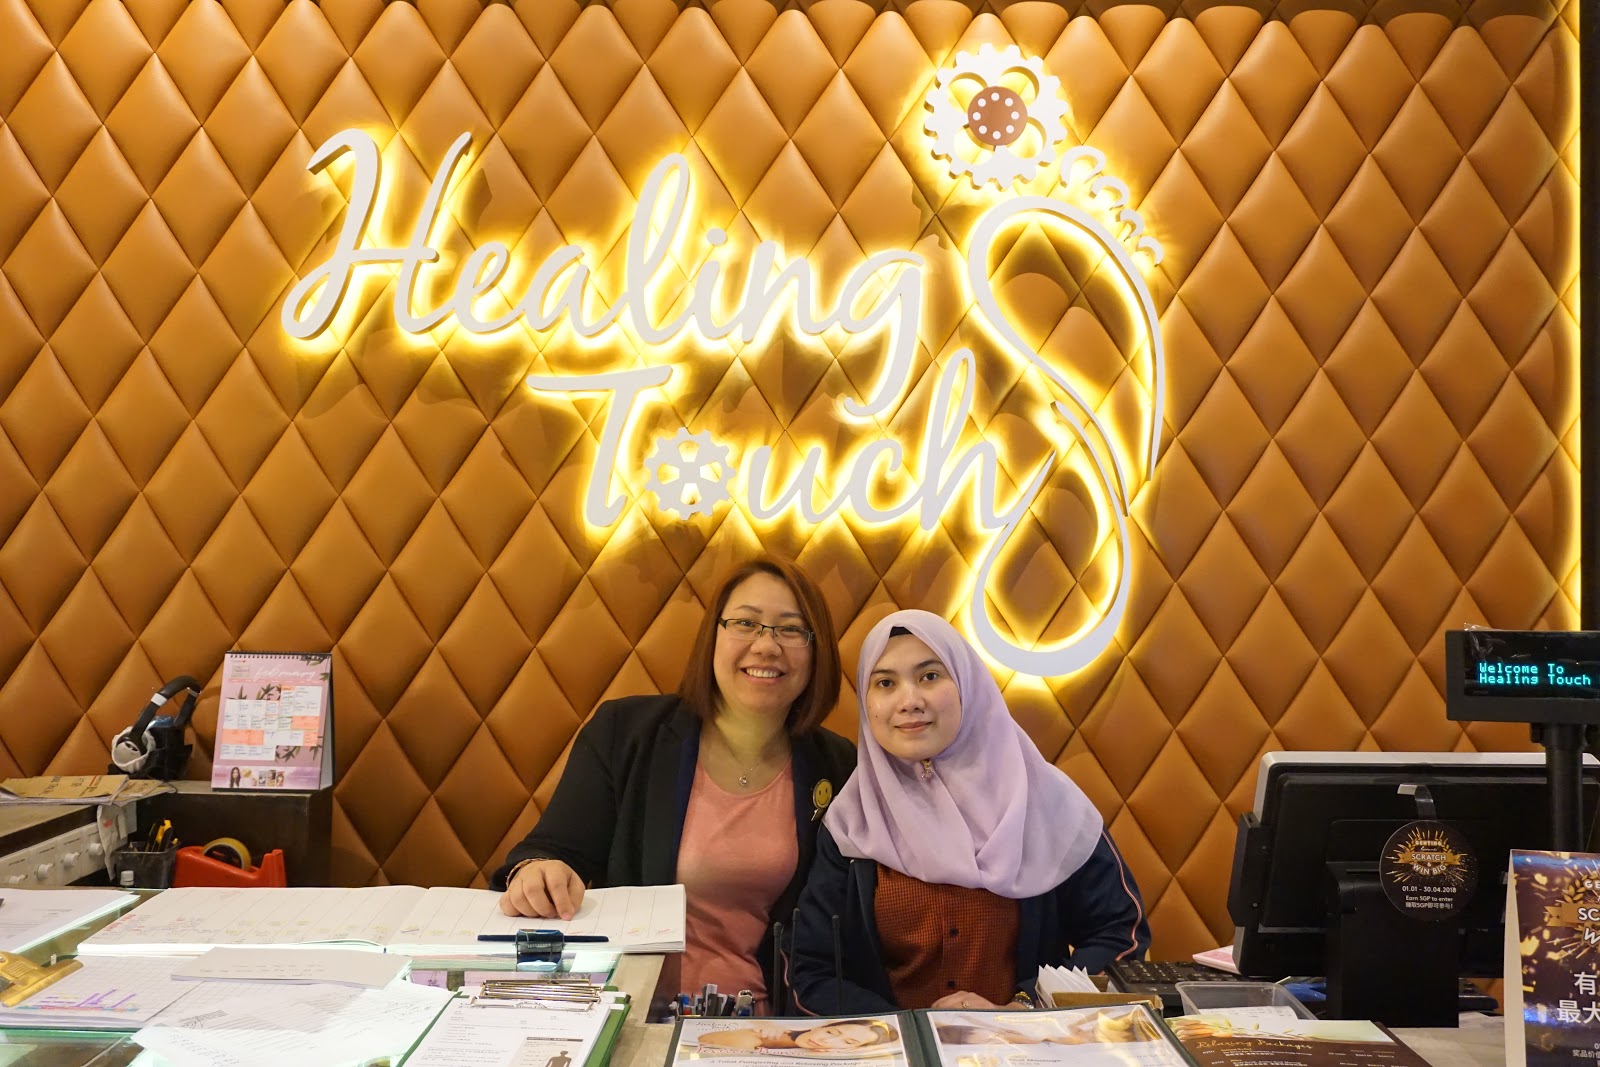 HEALING TOUCH SPA